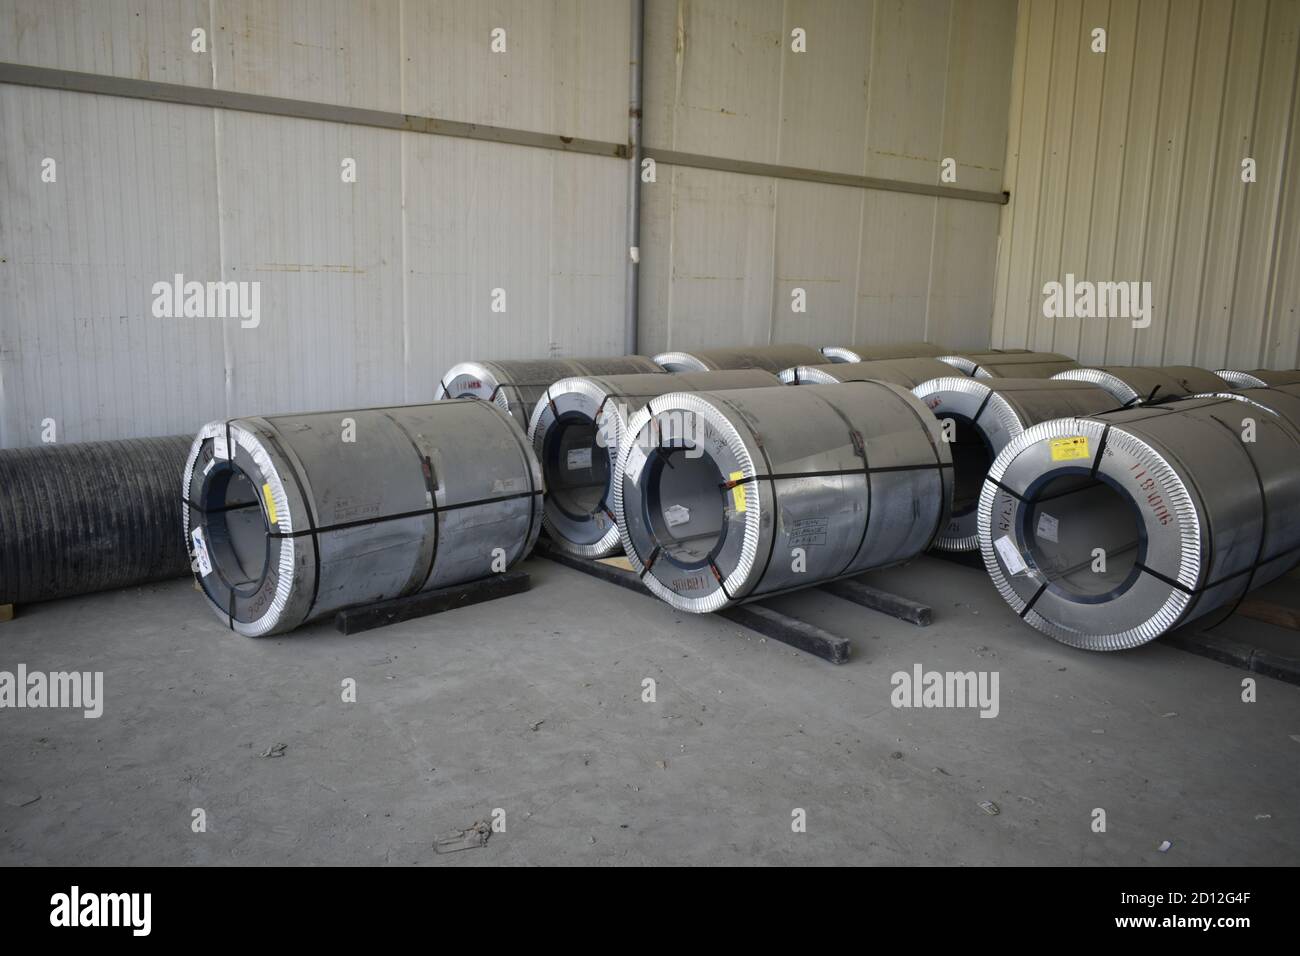 Rolls of steel sheet stored in warehouse; galvanized steel coil in the Duct Factory. Packed rolls of steel sheet, Cold rolled steel coils. Stock Photo